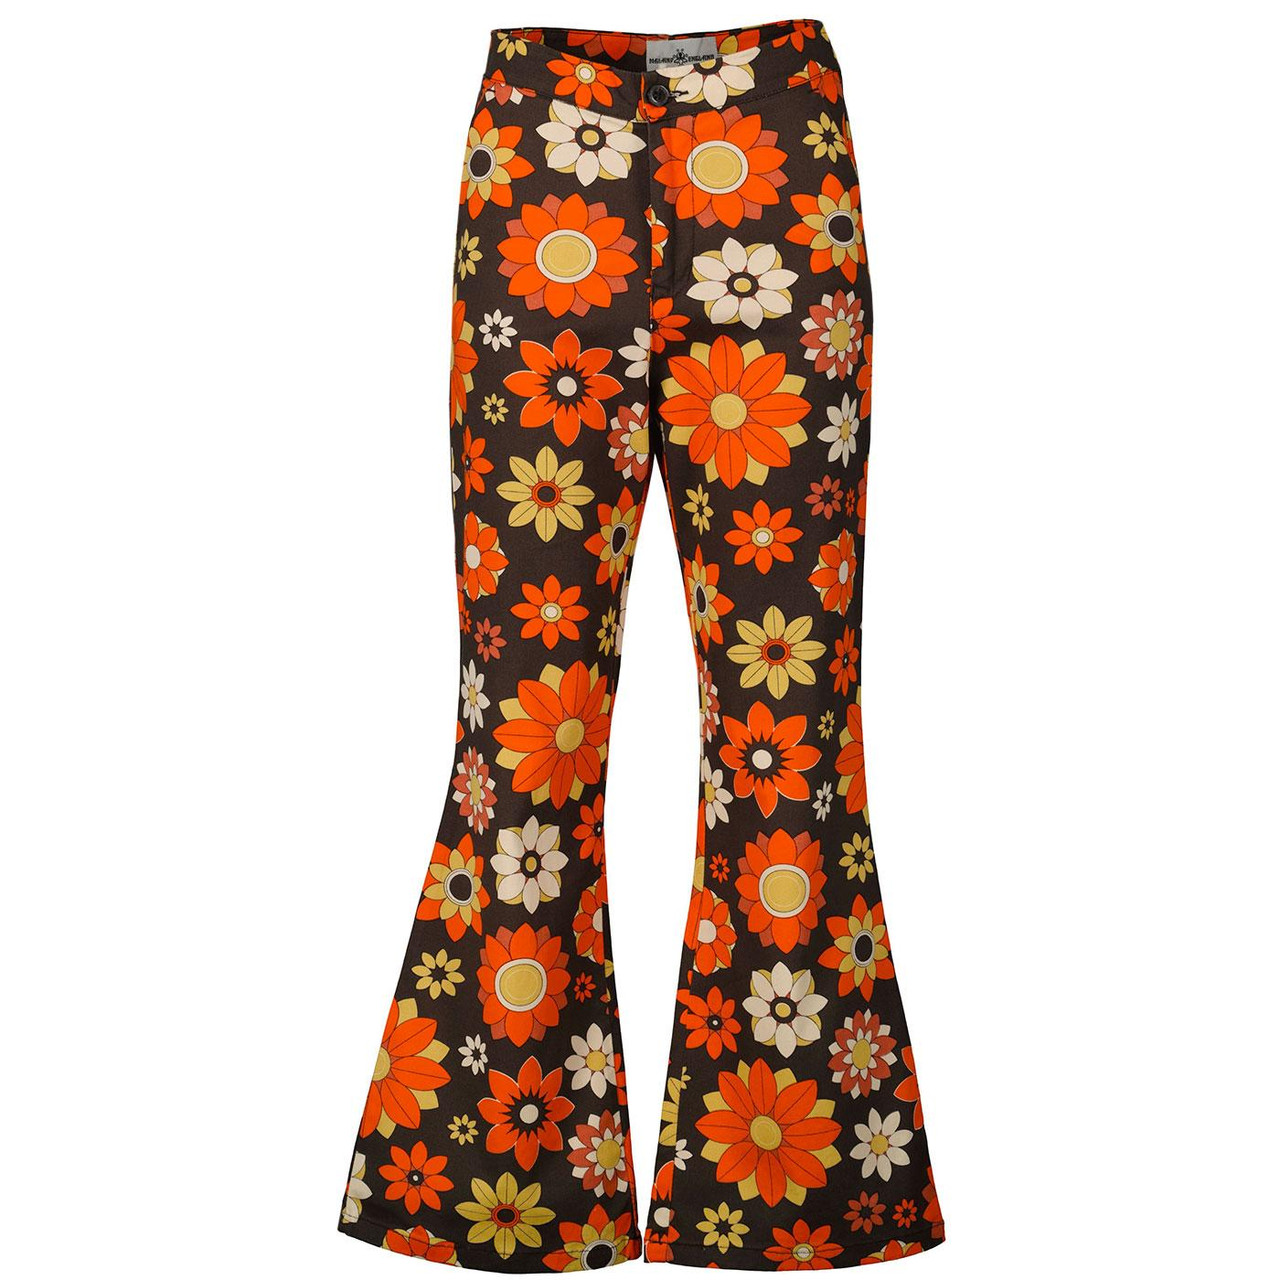 https://cdn11.bigcommerce.com/s-y27bzybraz/images/stencil/1280x1280/products/5829/10485/madcap-england-belle-flares-floral4__83436.1661261382.jpg?c=1